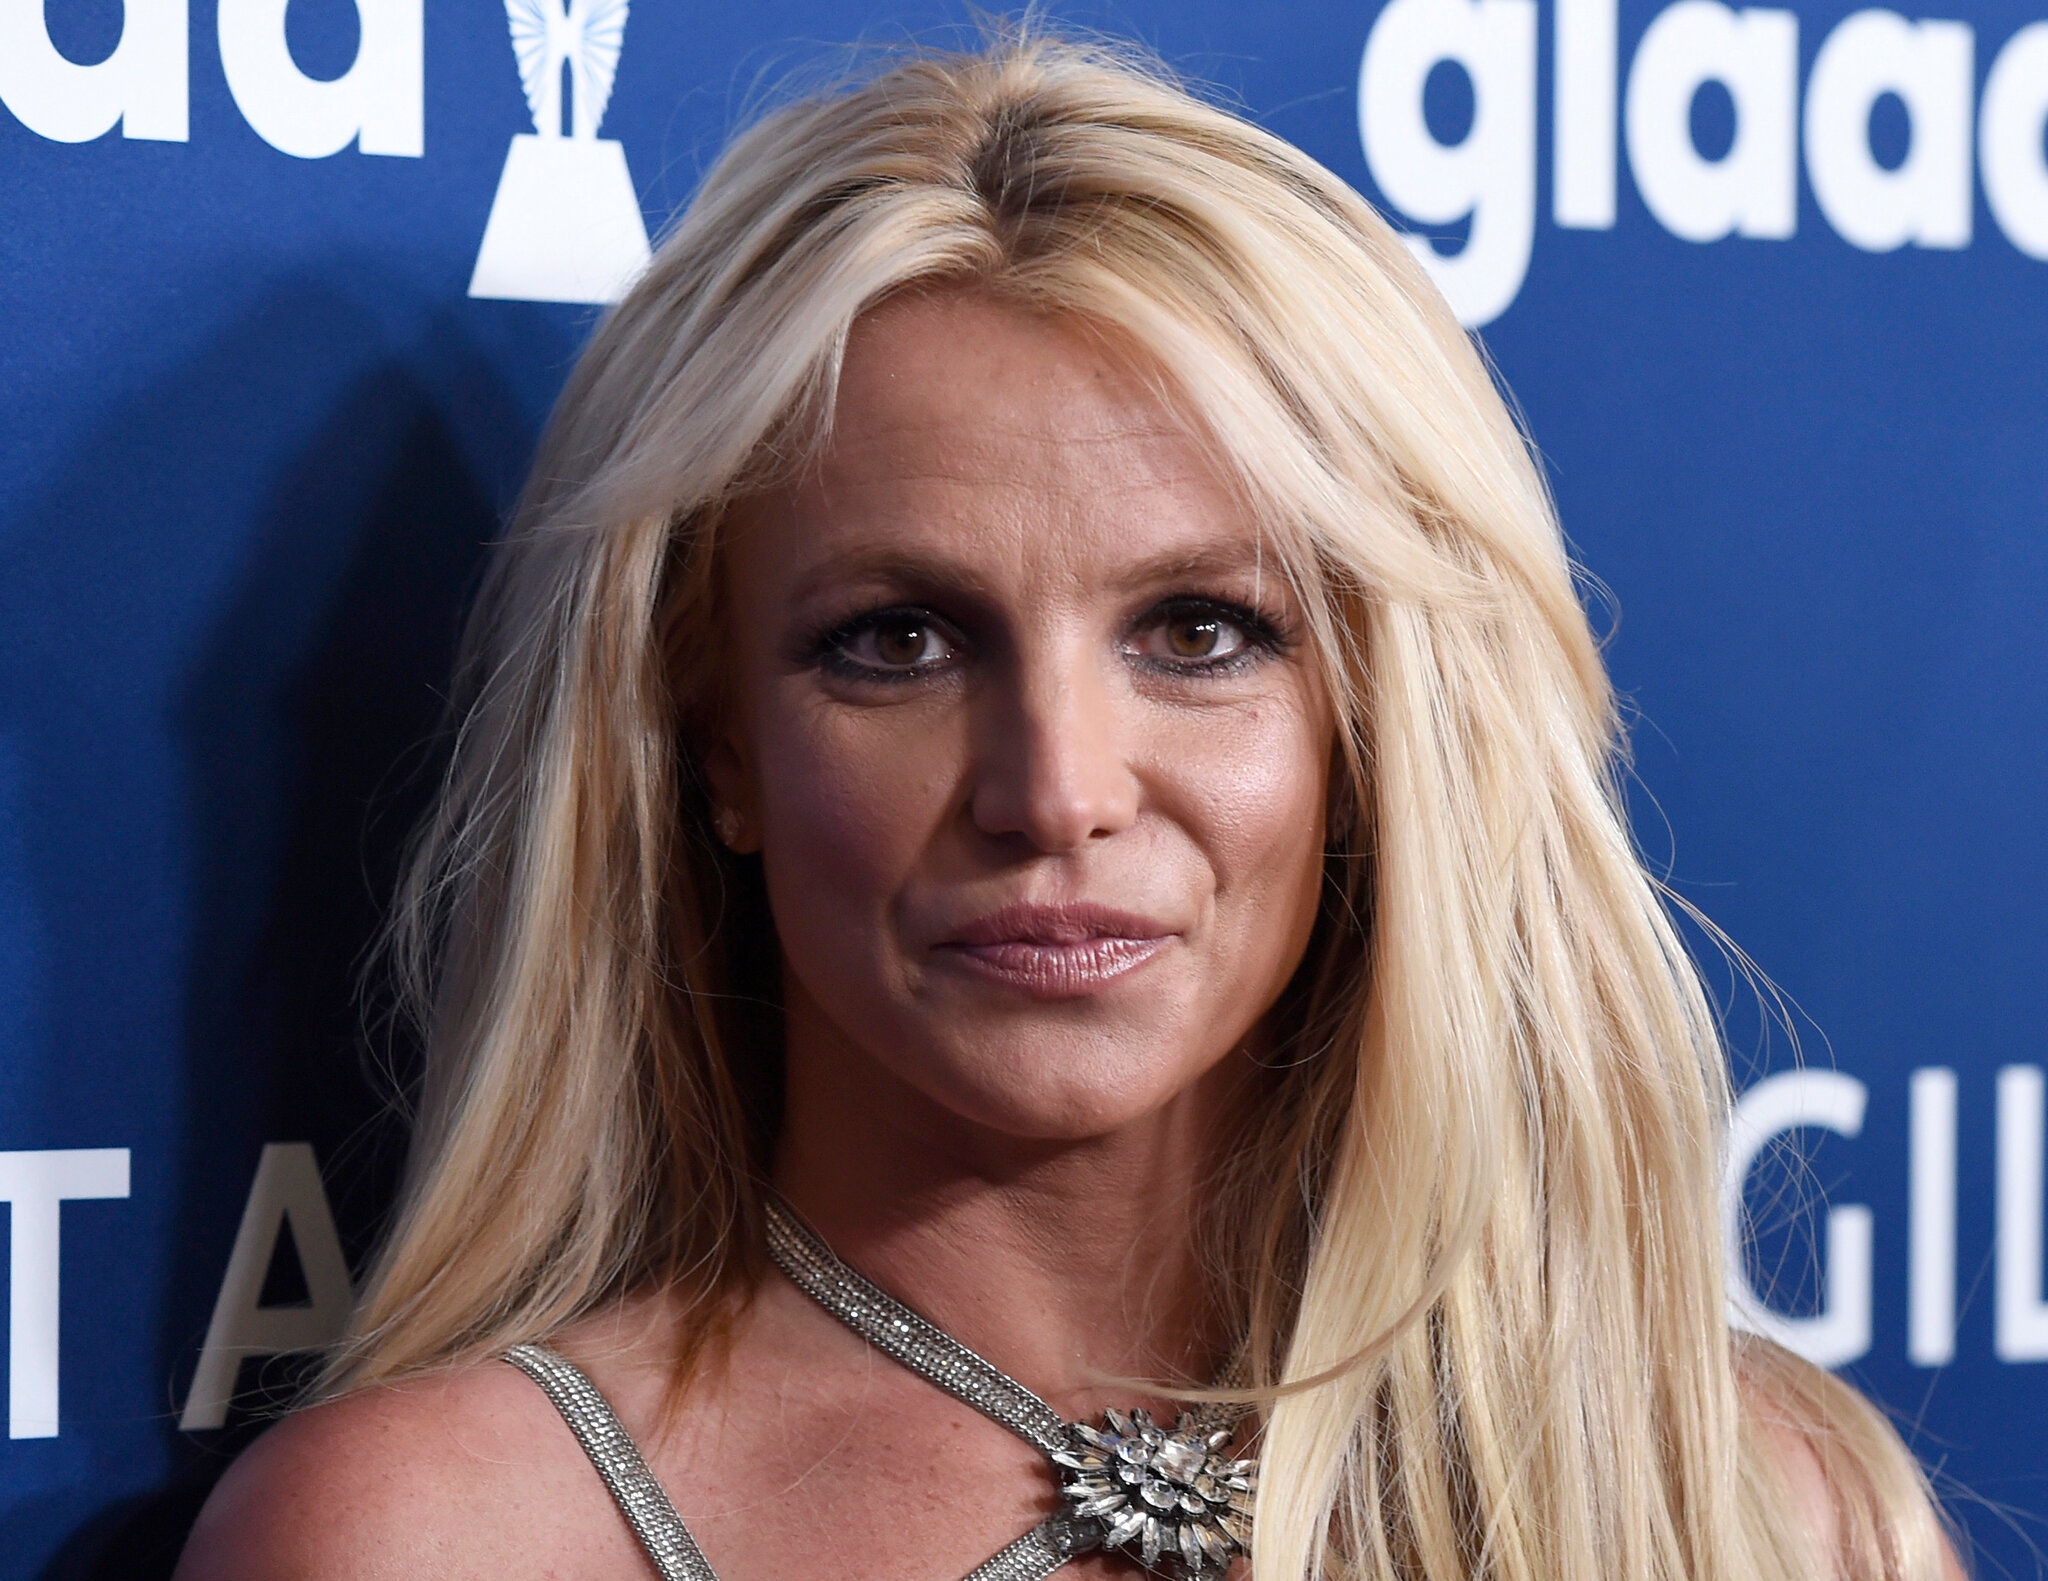 Britney Spears’s Father Files to End Her Conservatorship